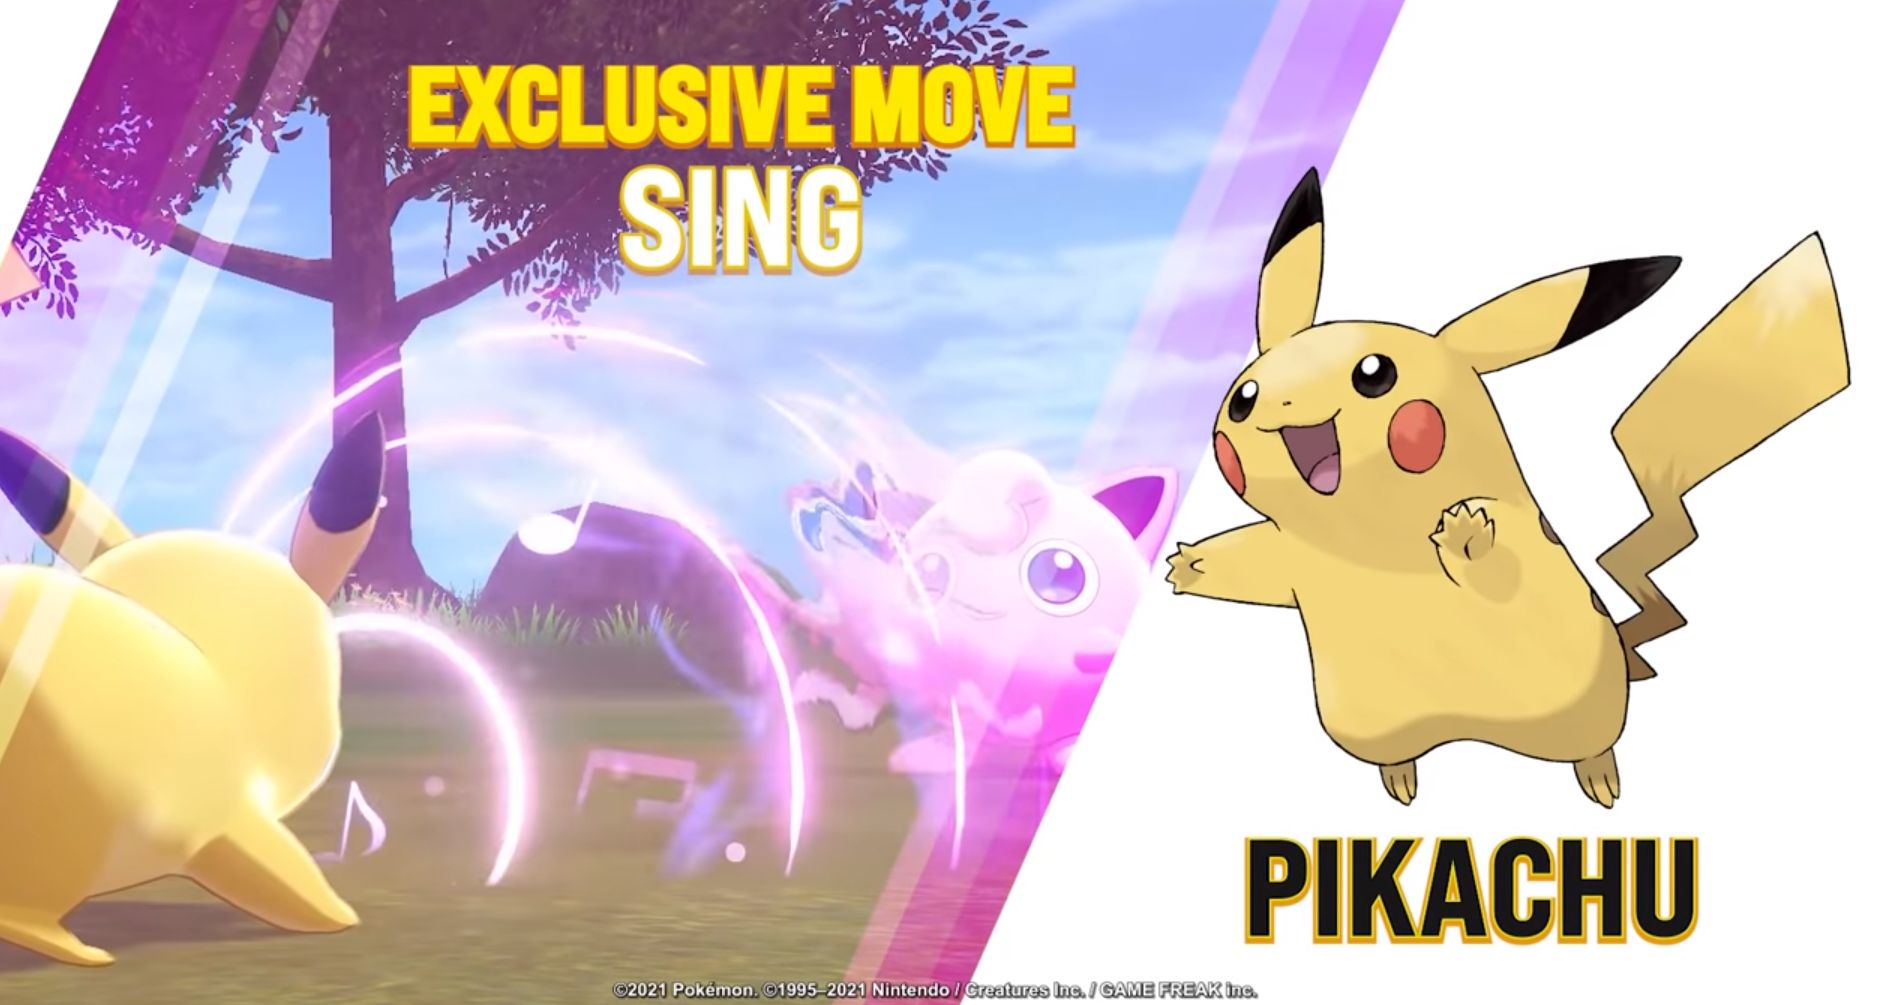 Pokémon Sword and Shield Sing Pikachu code How to download Sing Pikachu explained